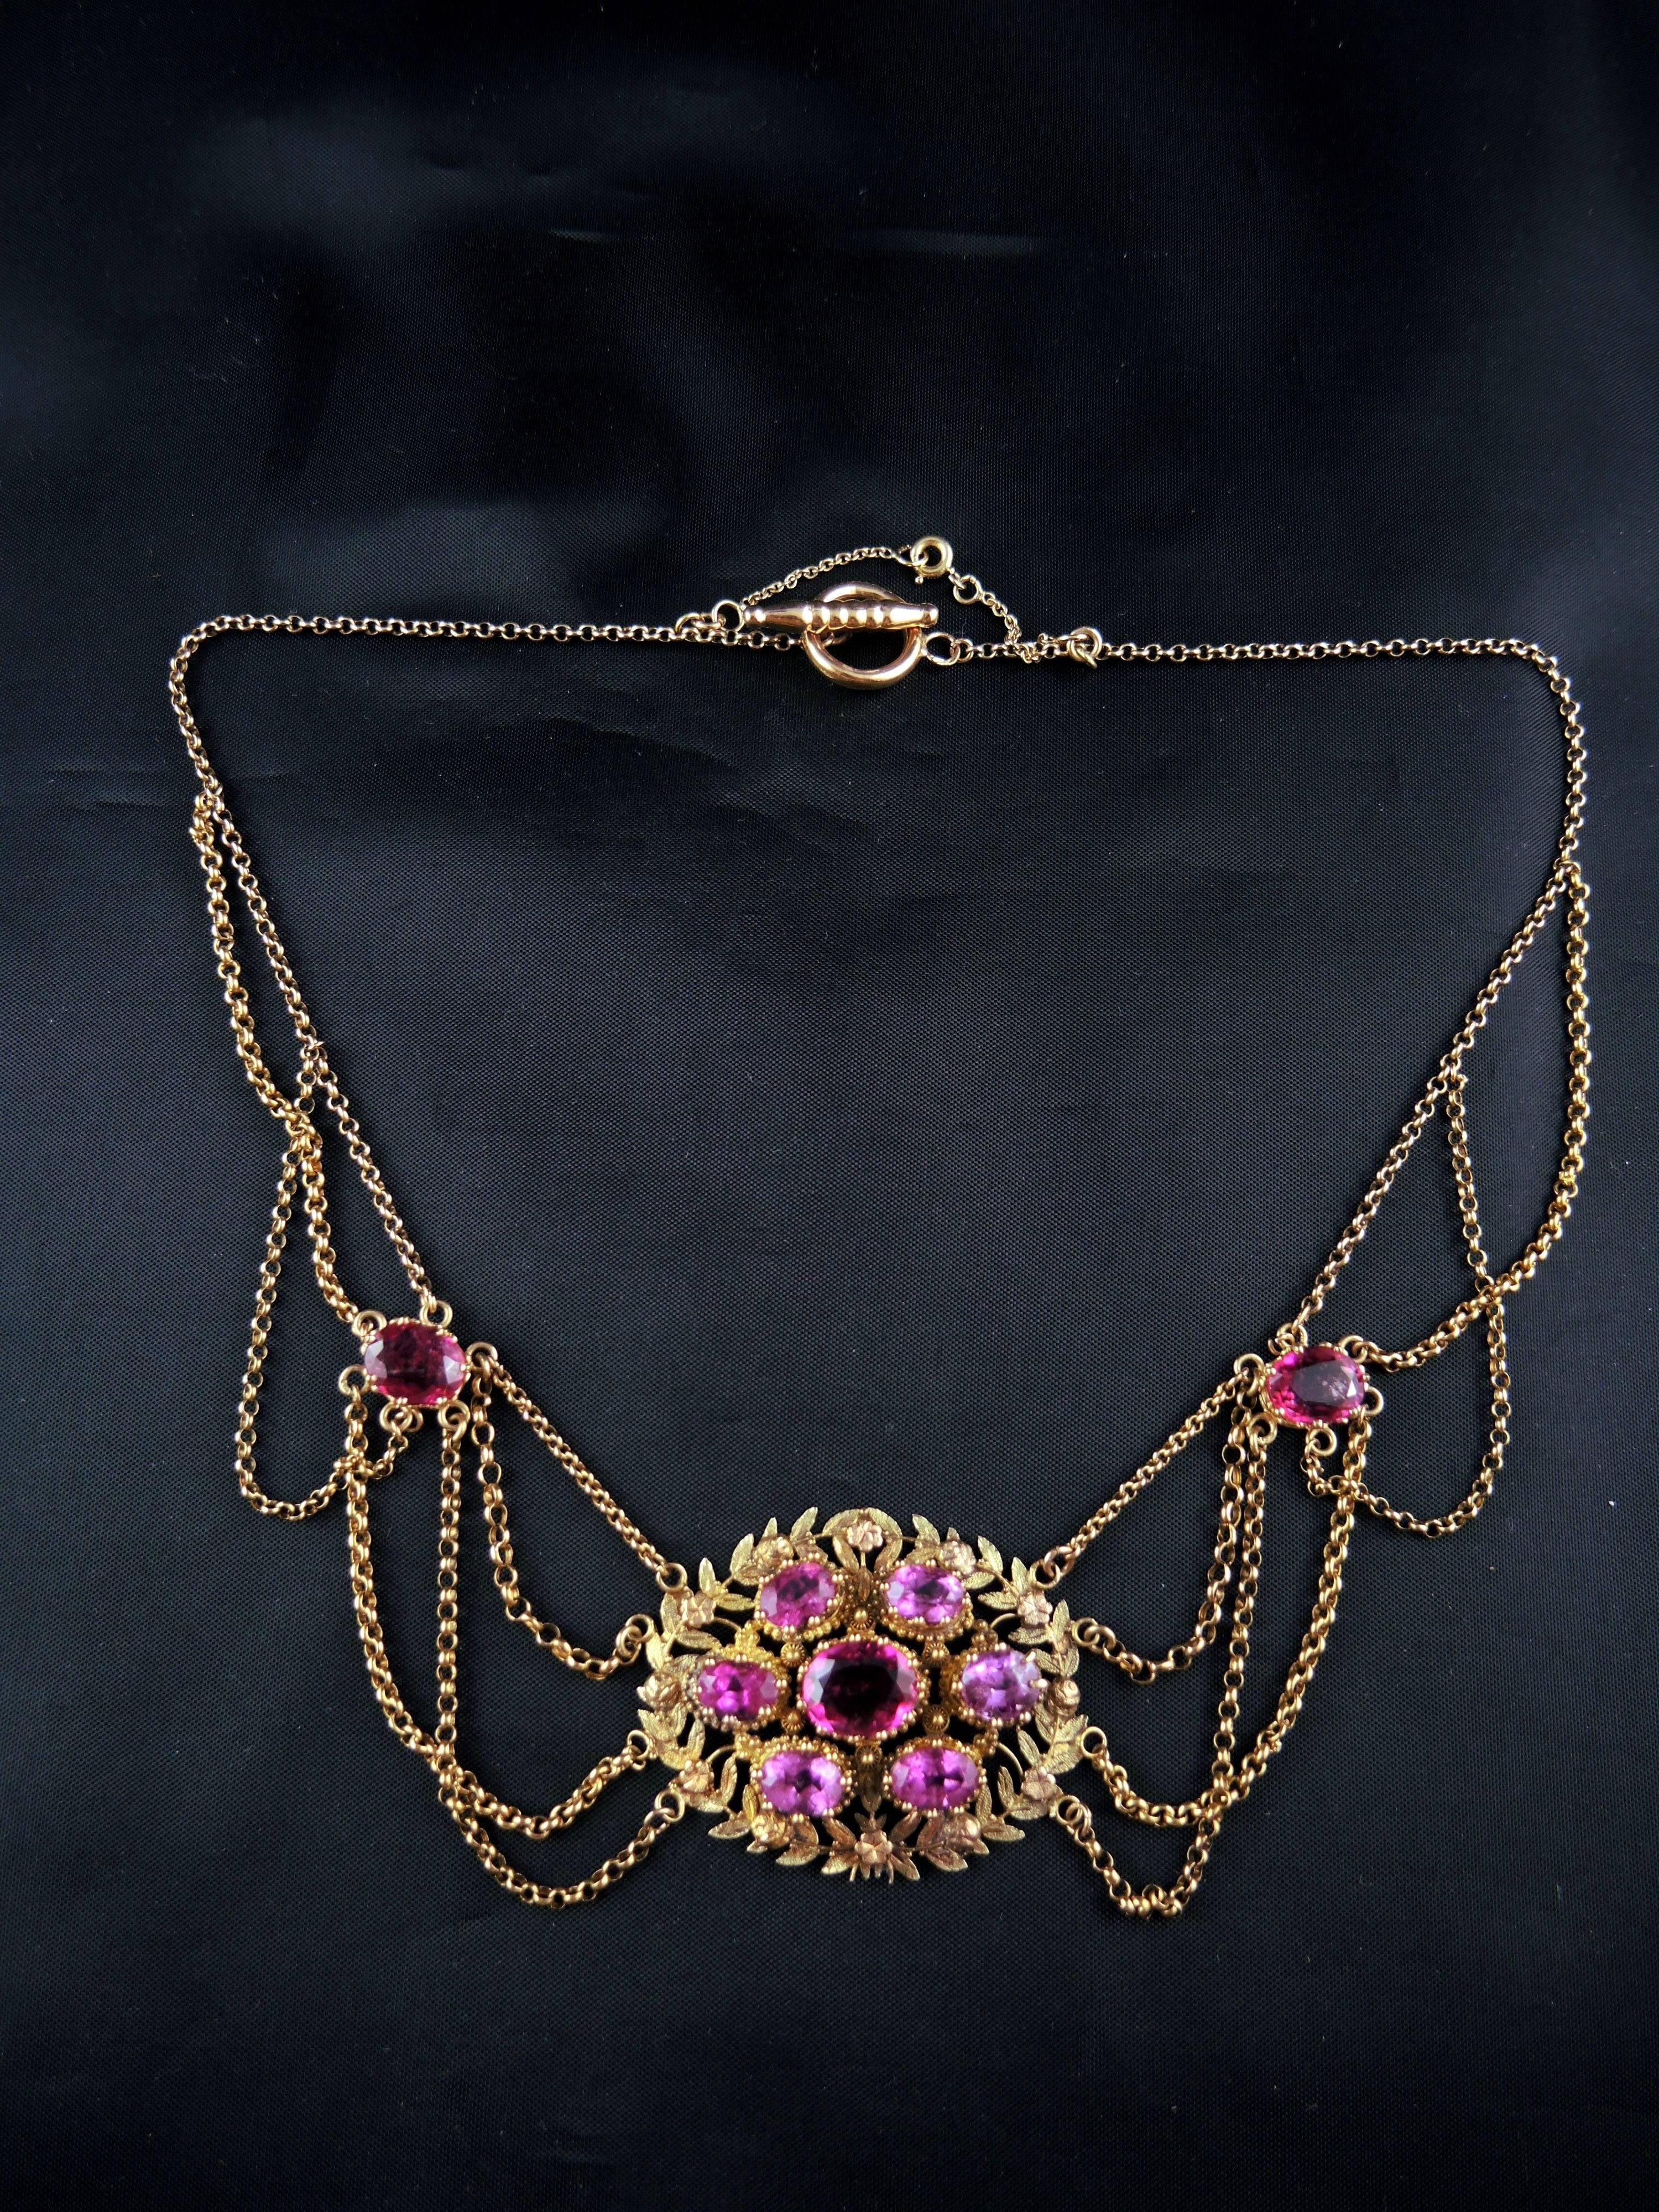 Early 19th Century Esclavage Multistrand Necklace with Pink Tourmalines 1